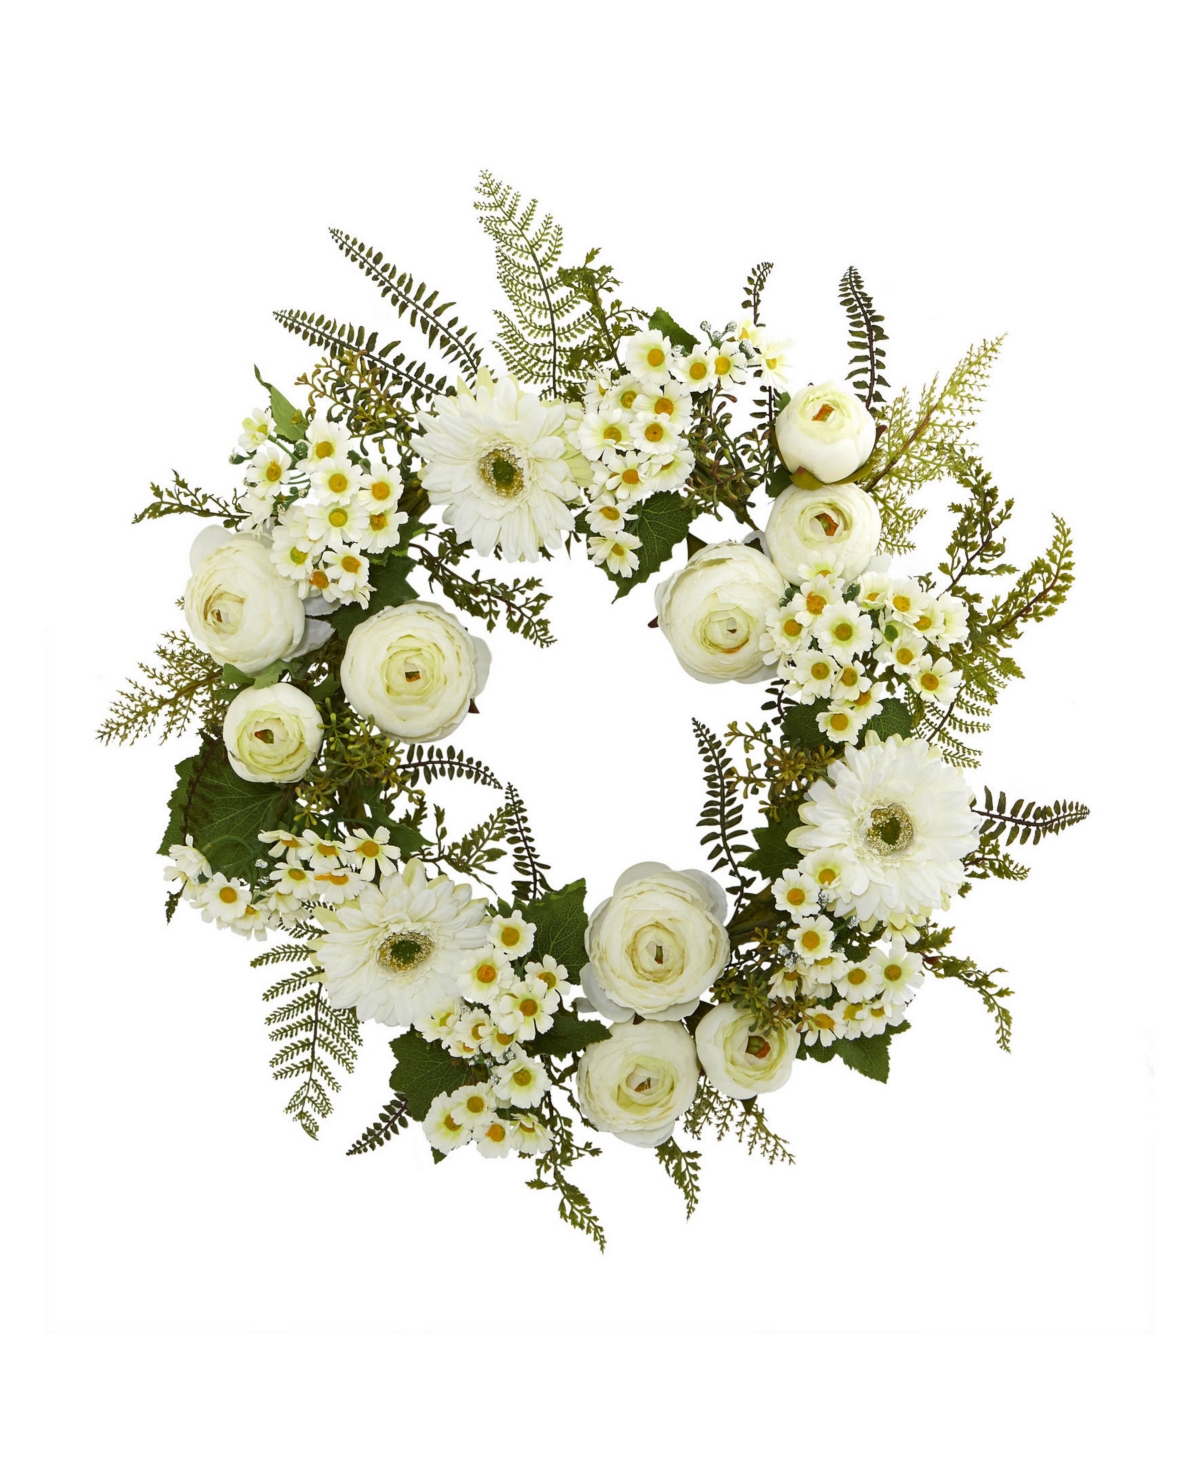 24" Mixed Daisies and Ranunculus Wreath - White